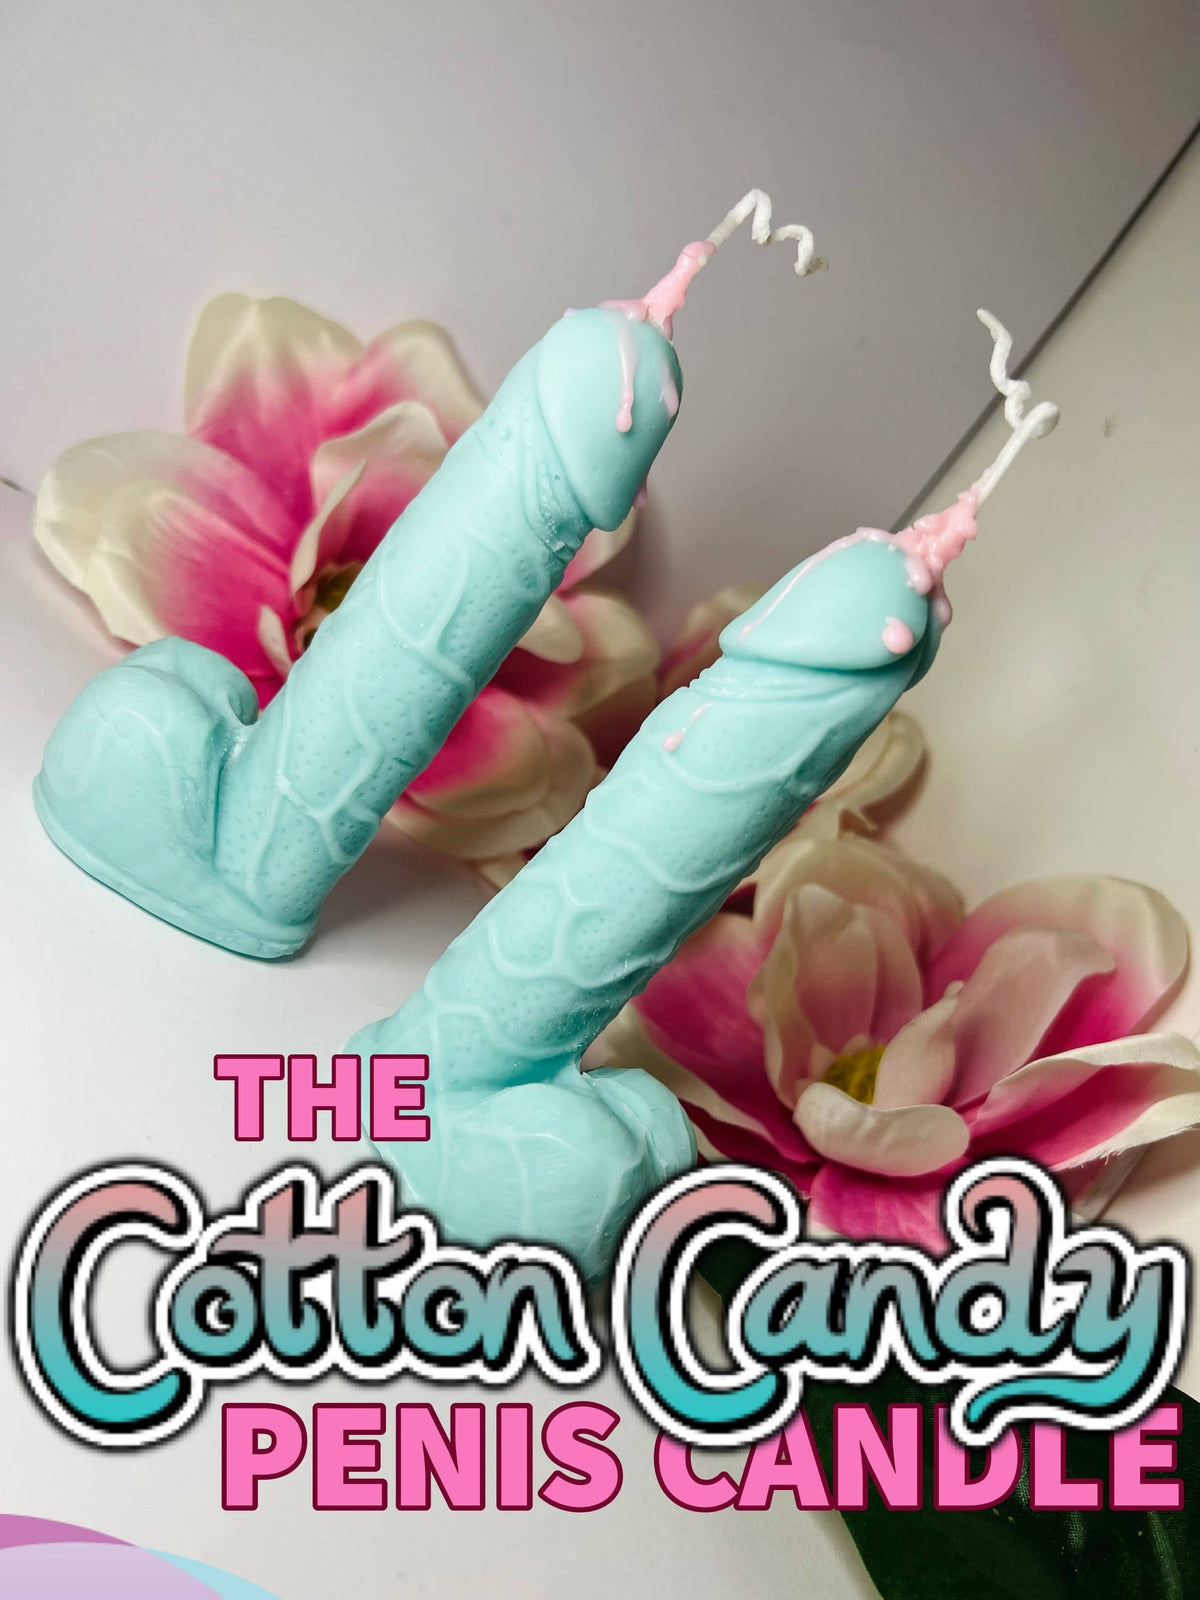 Special Edition Exploding Penis Candle - Cotton Candy - Vegan Soy Wax